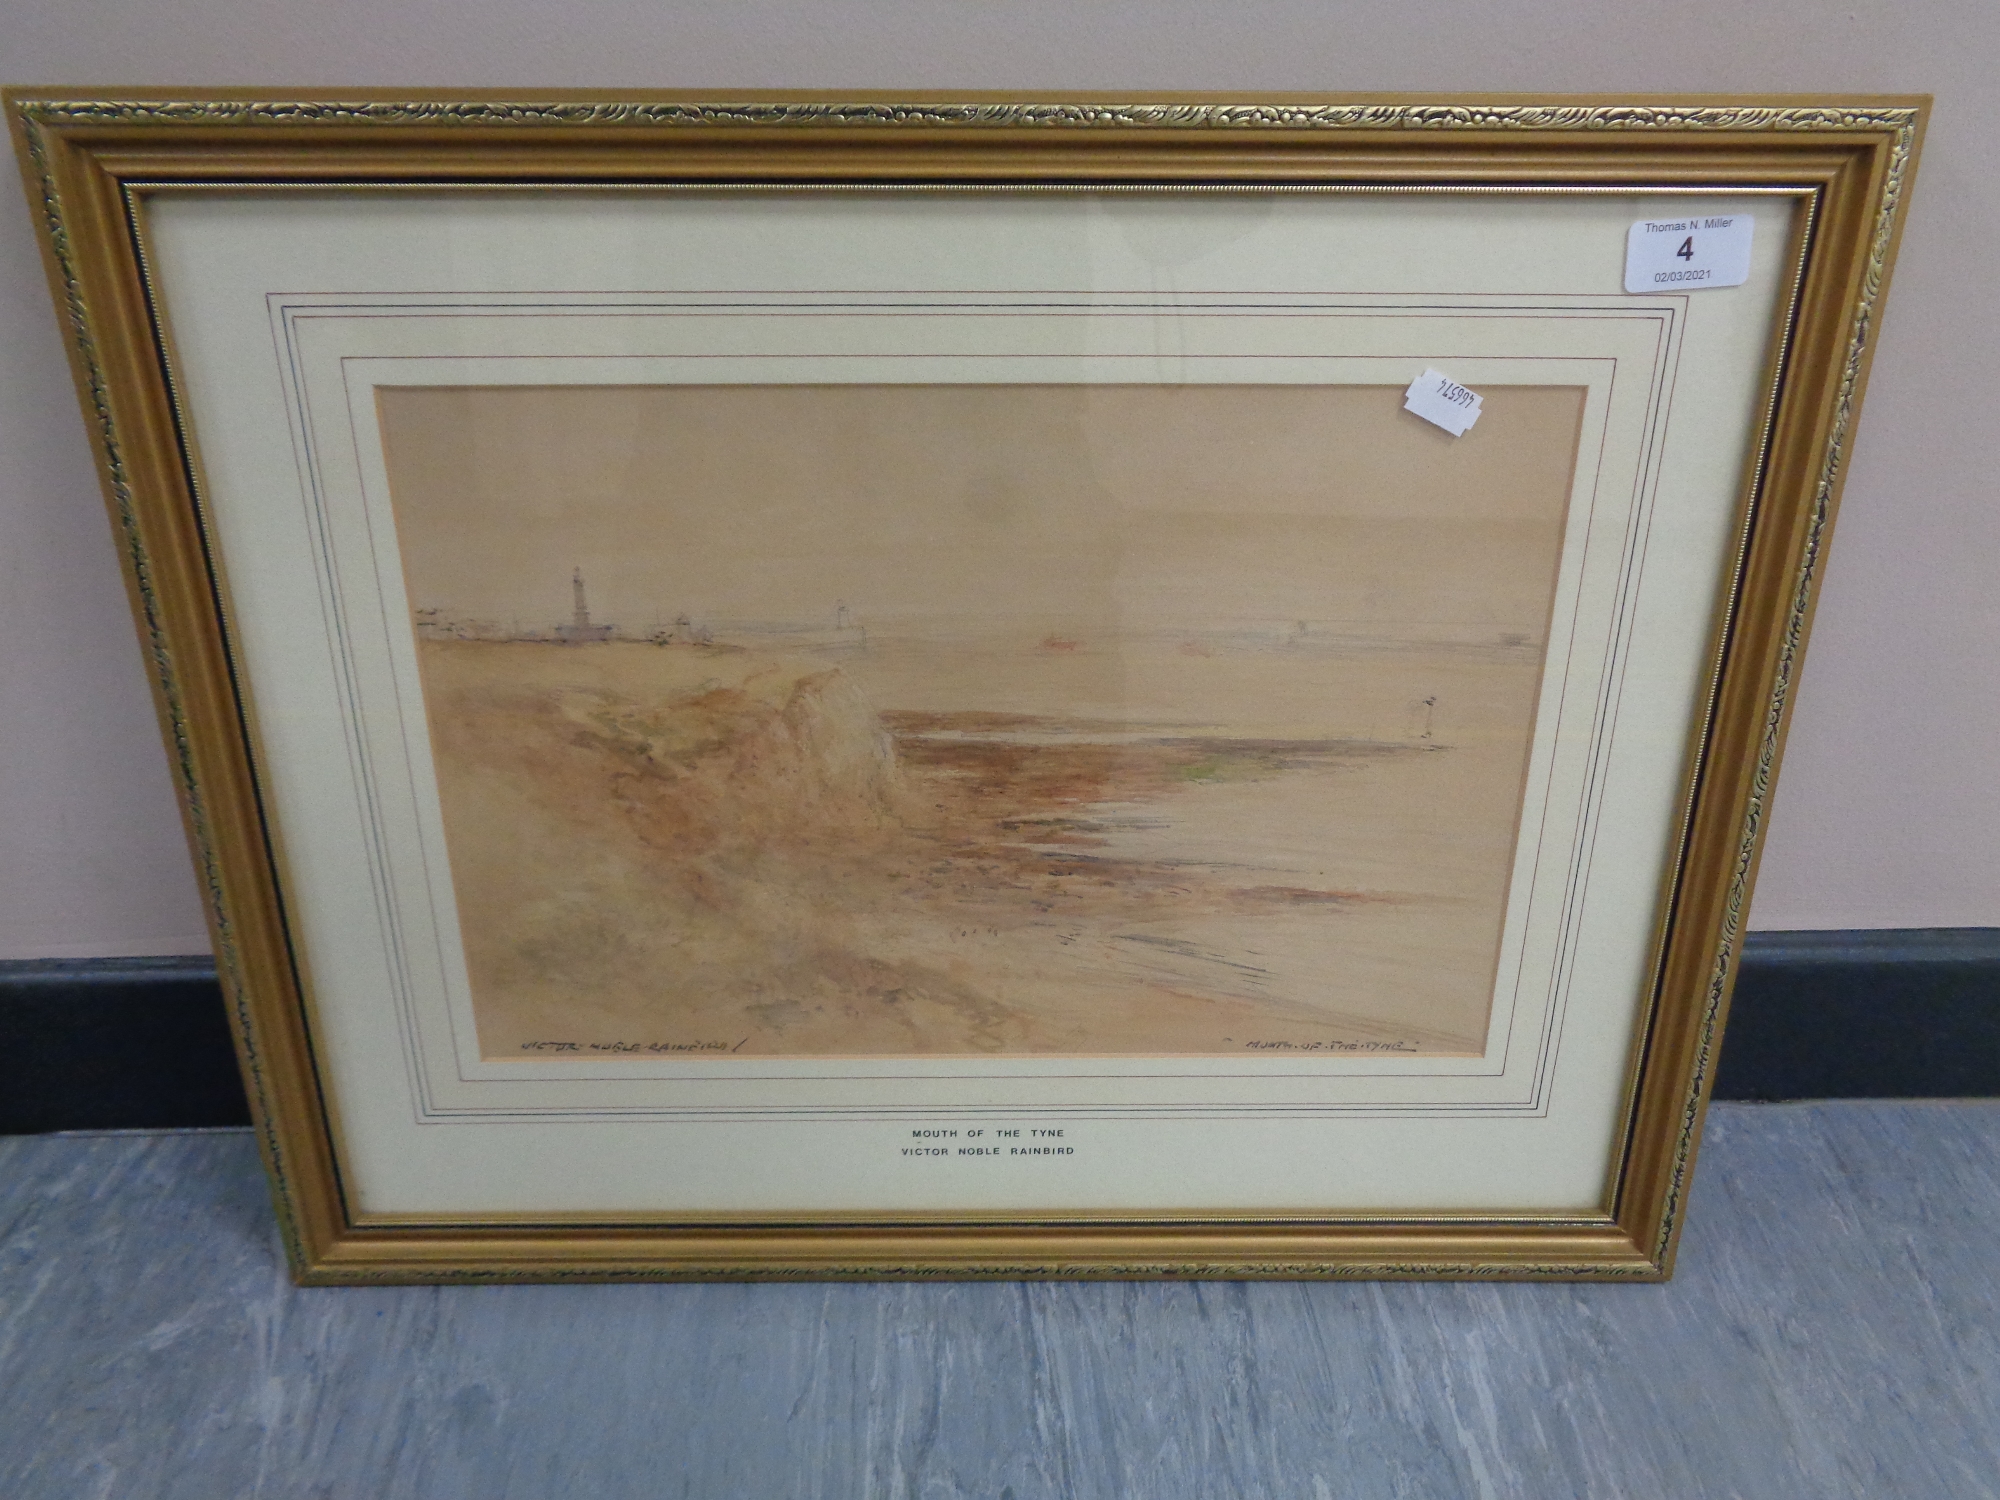 Victor Noble Rainbird (1888-1936) : Mouth of The Tyne, watercolour, signed, inscribed,